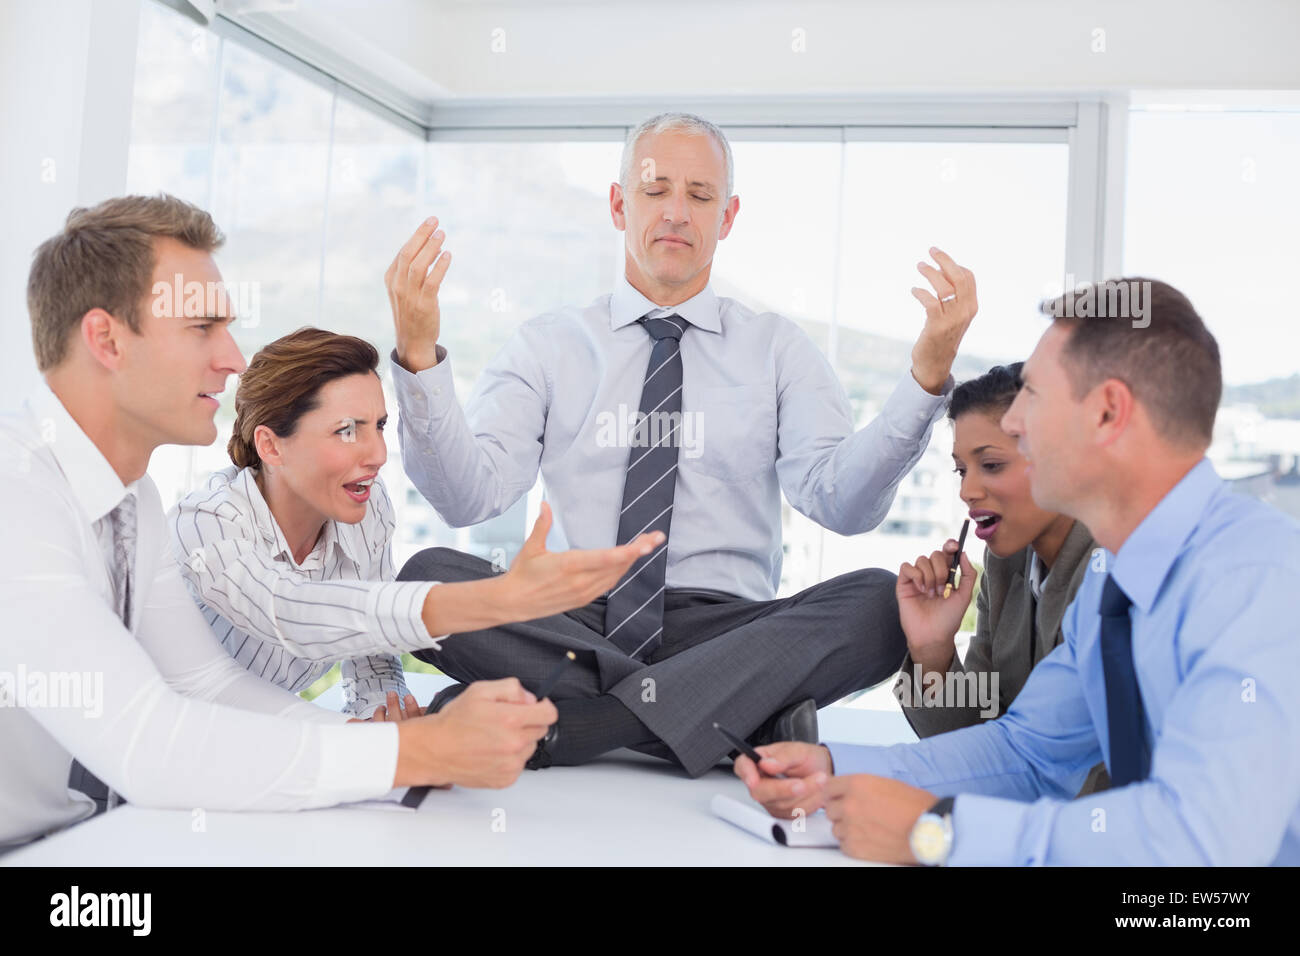 Businessman relaxing on the desk with upset colleagues around Stock Photo